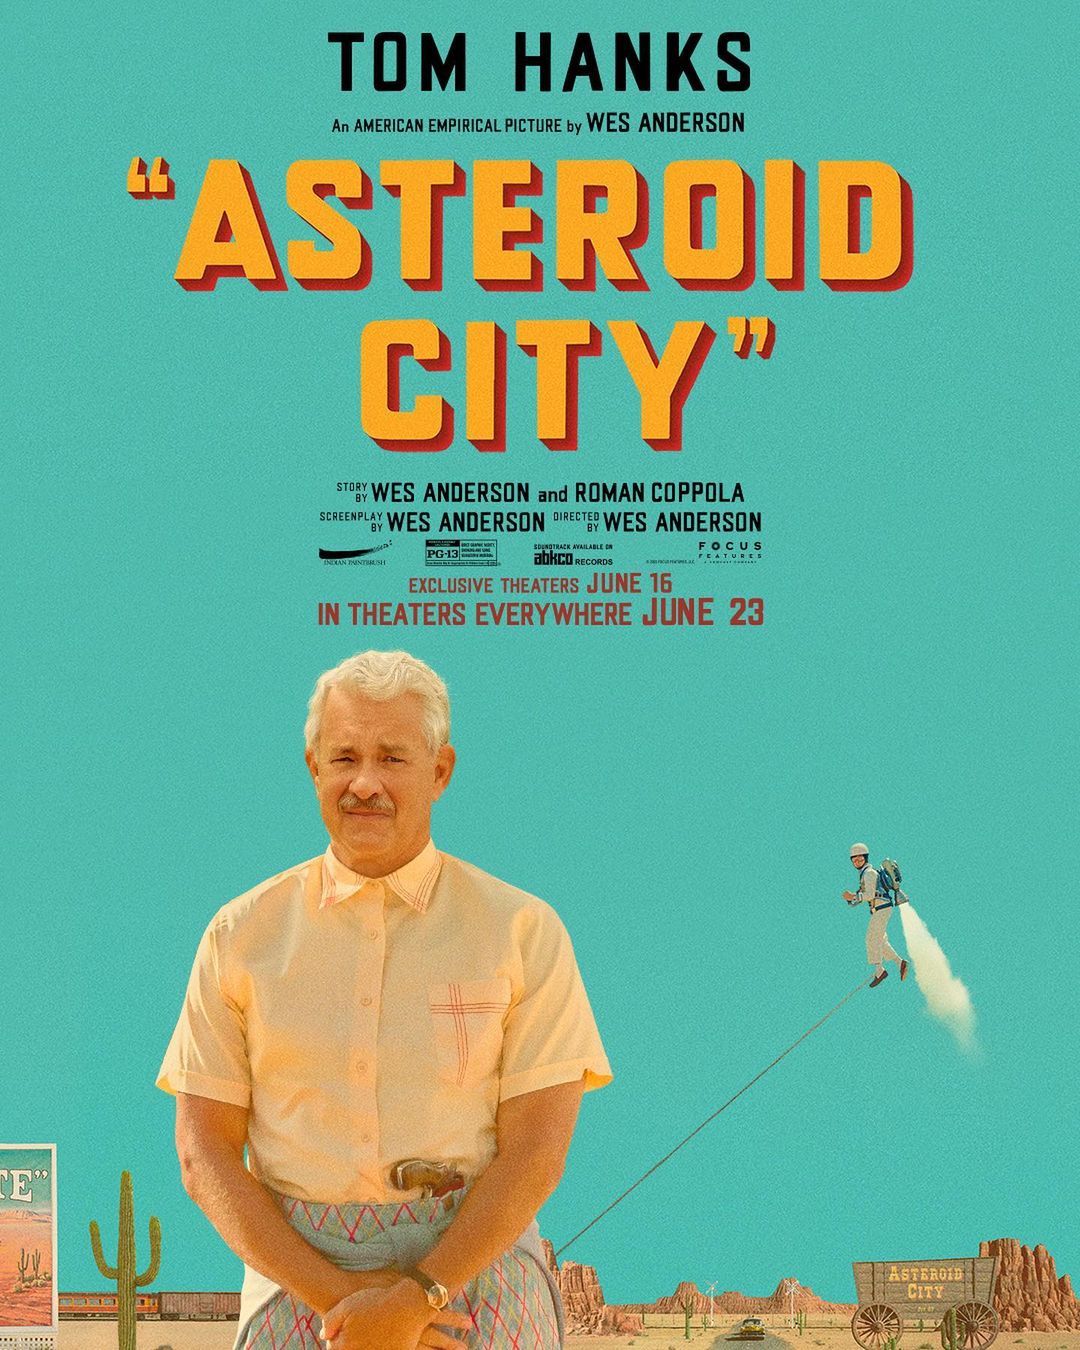 Asteroid City Movie (2023) Cast, Release Date, Story, Budget, Collection, Poster, Trailer, Review